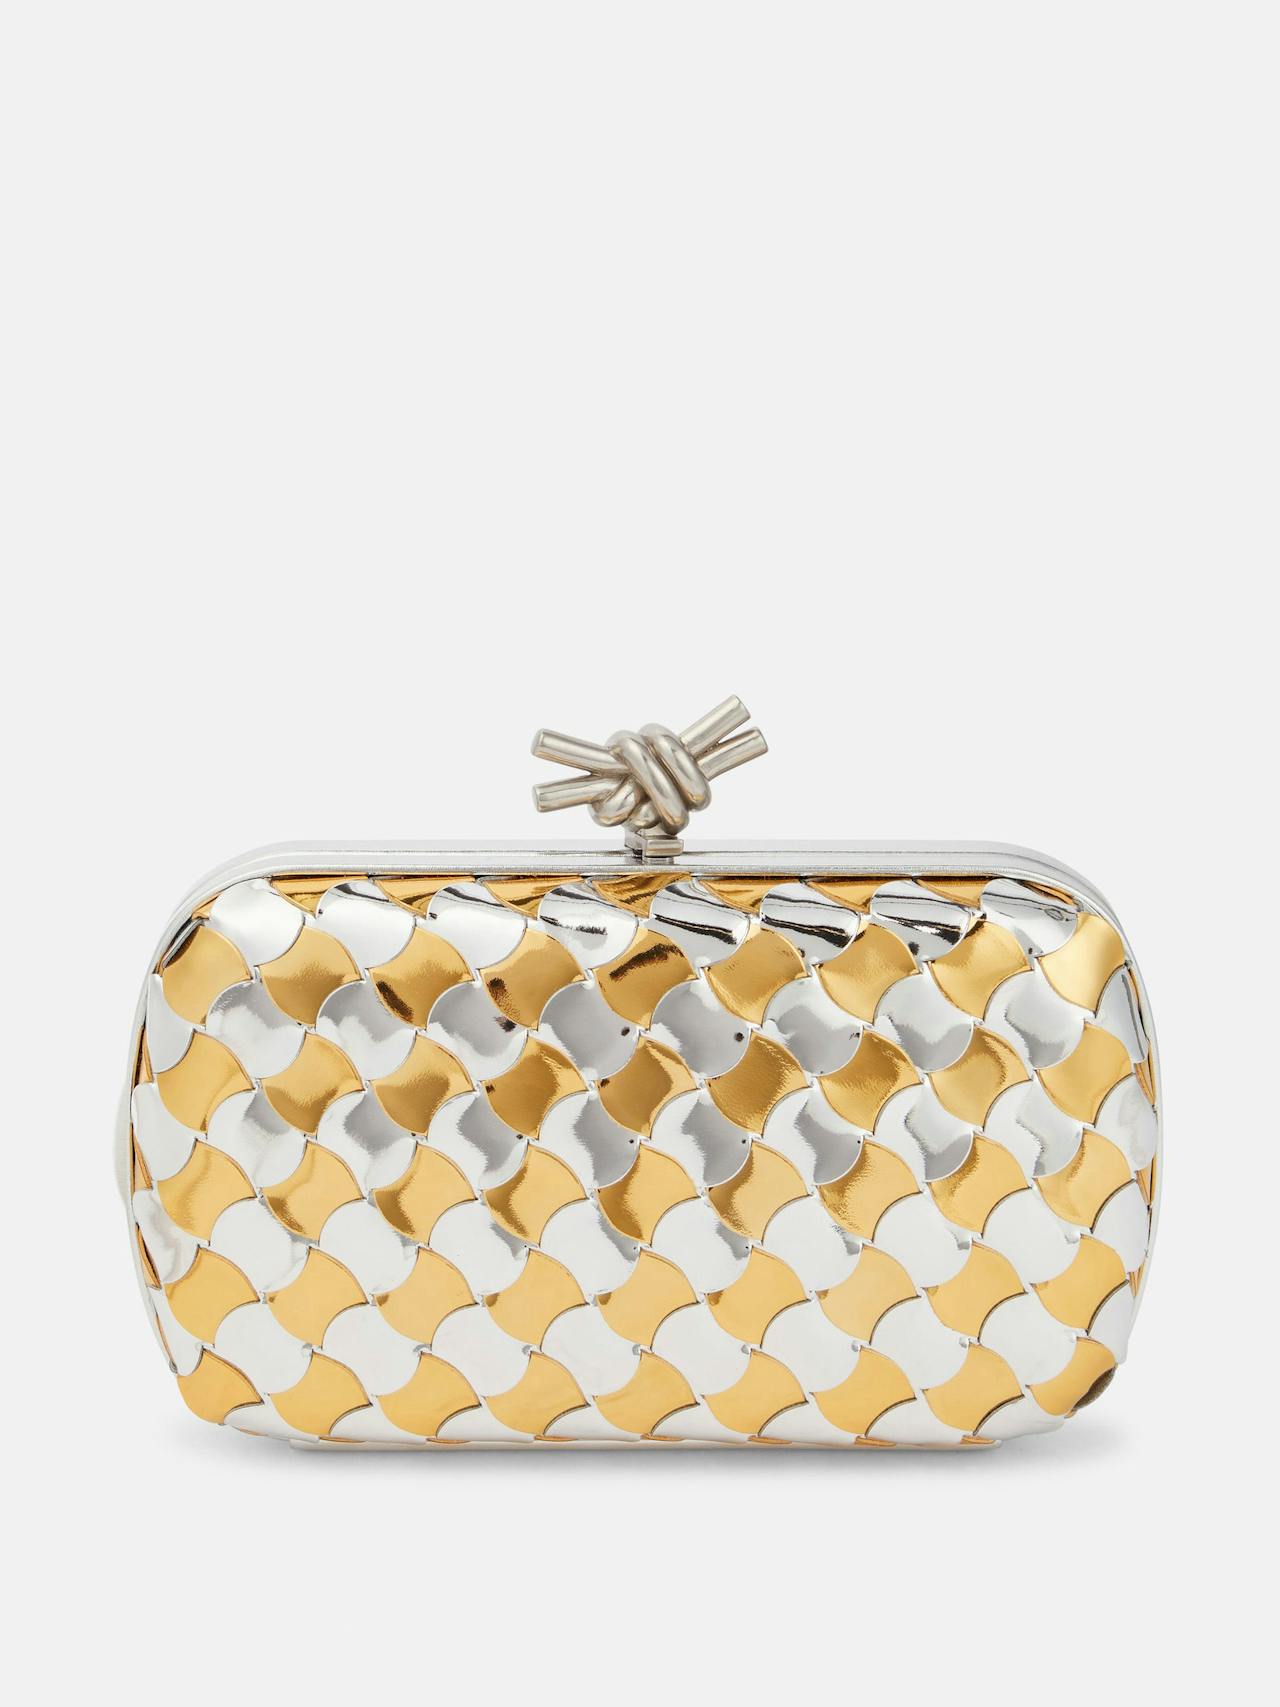 Pouch mini mirrored leather clutch